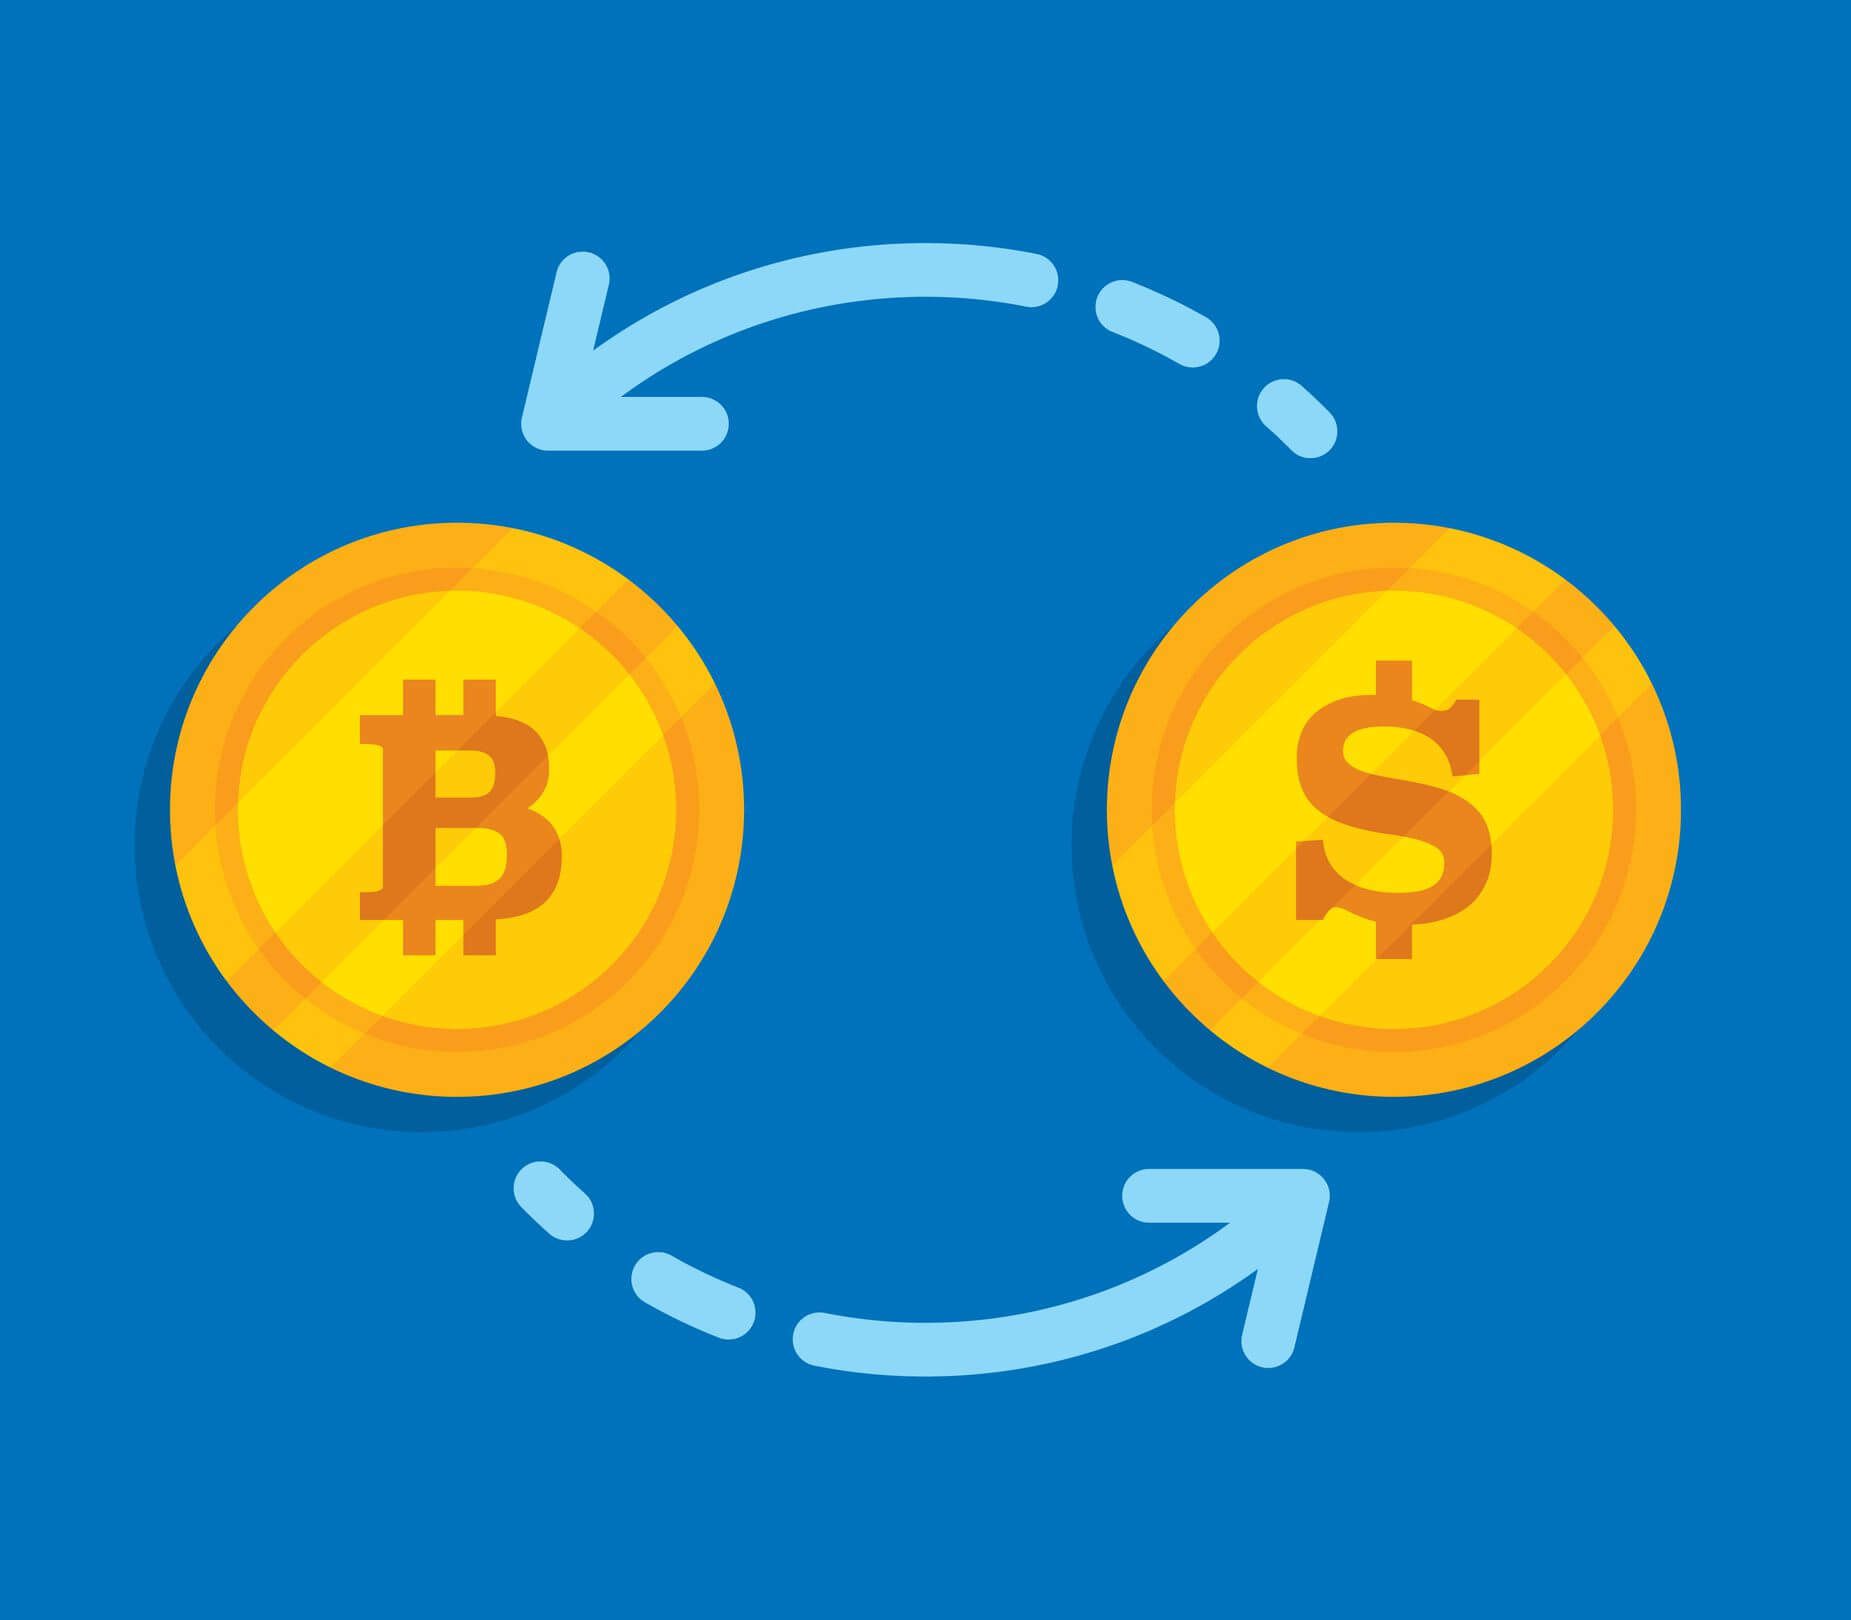 GitHub - coinconvert/crypto-convert: Instantly convert cryptocurrency and get price information